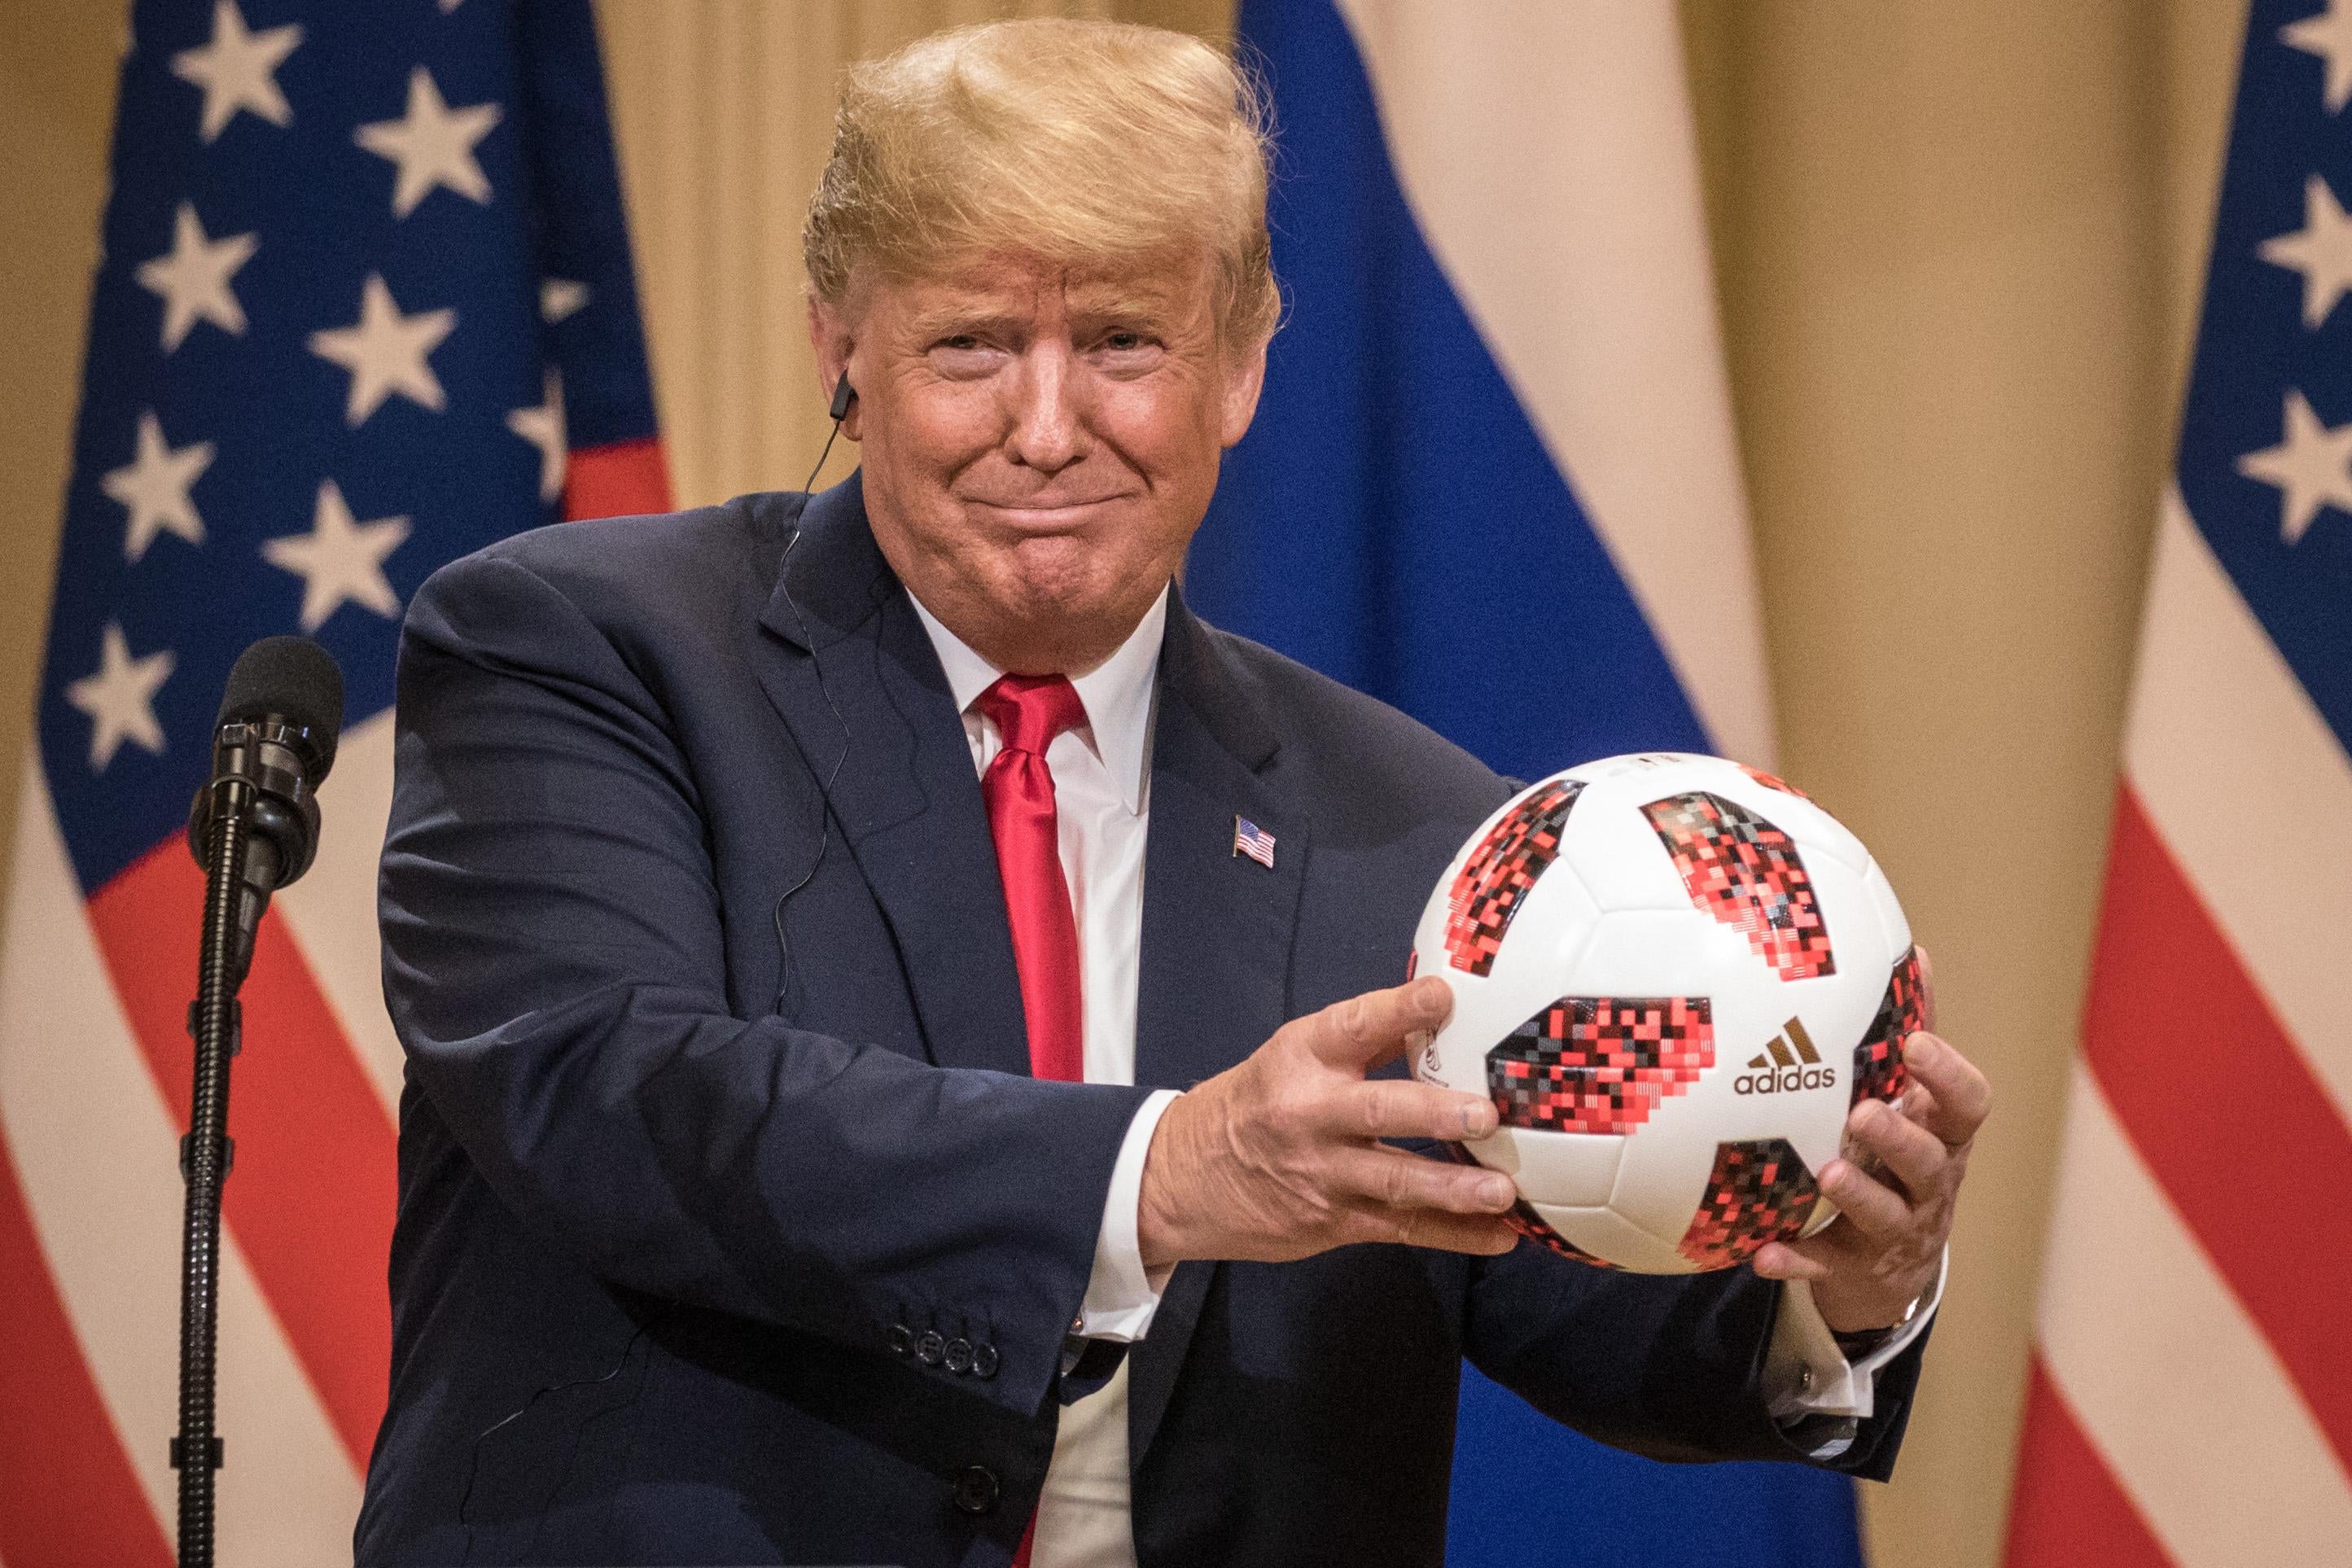 President Donald Trump holds a World Cup football given to him by Russian President Vladimir Putin during a joint press conference after their summit on July 16, 2018 in Helsinki, Finland. 